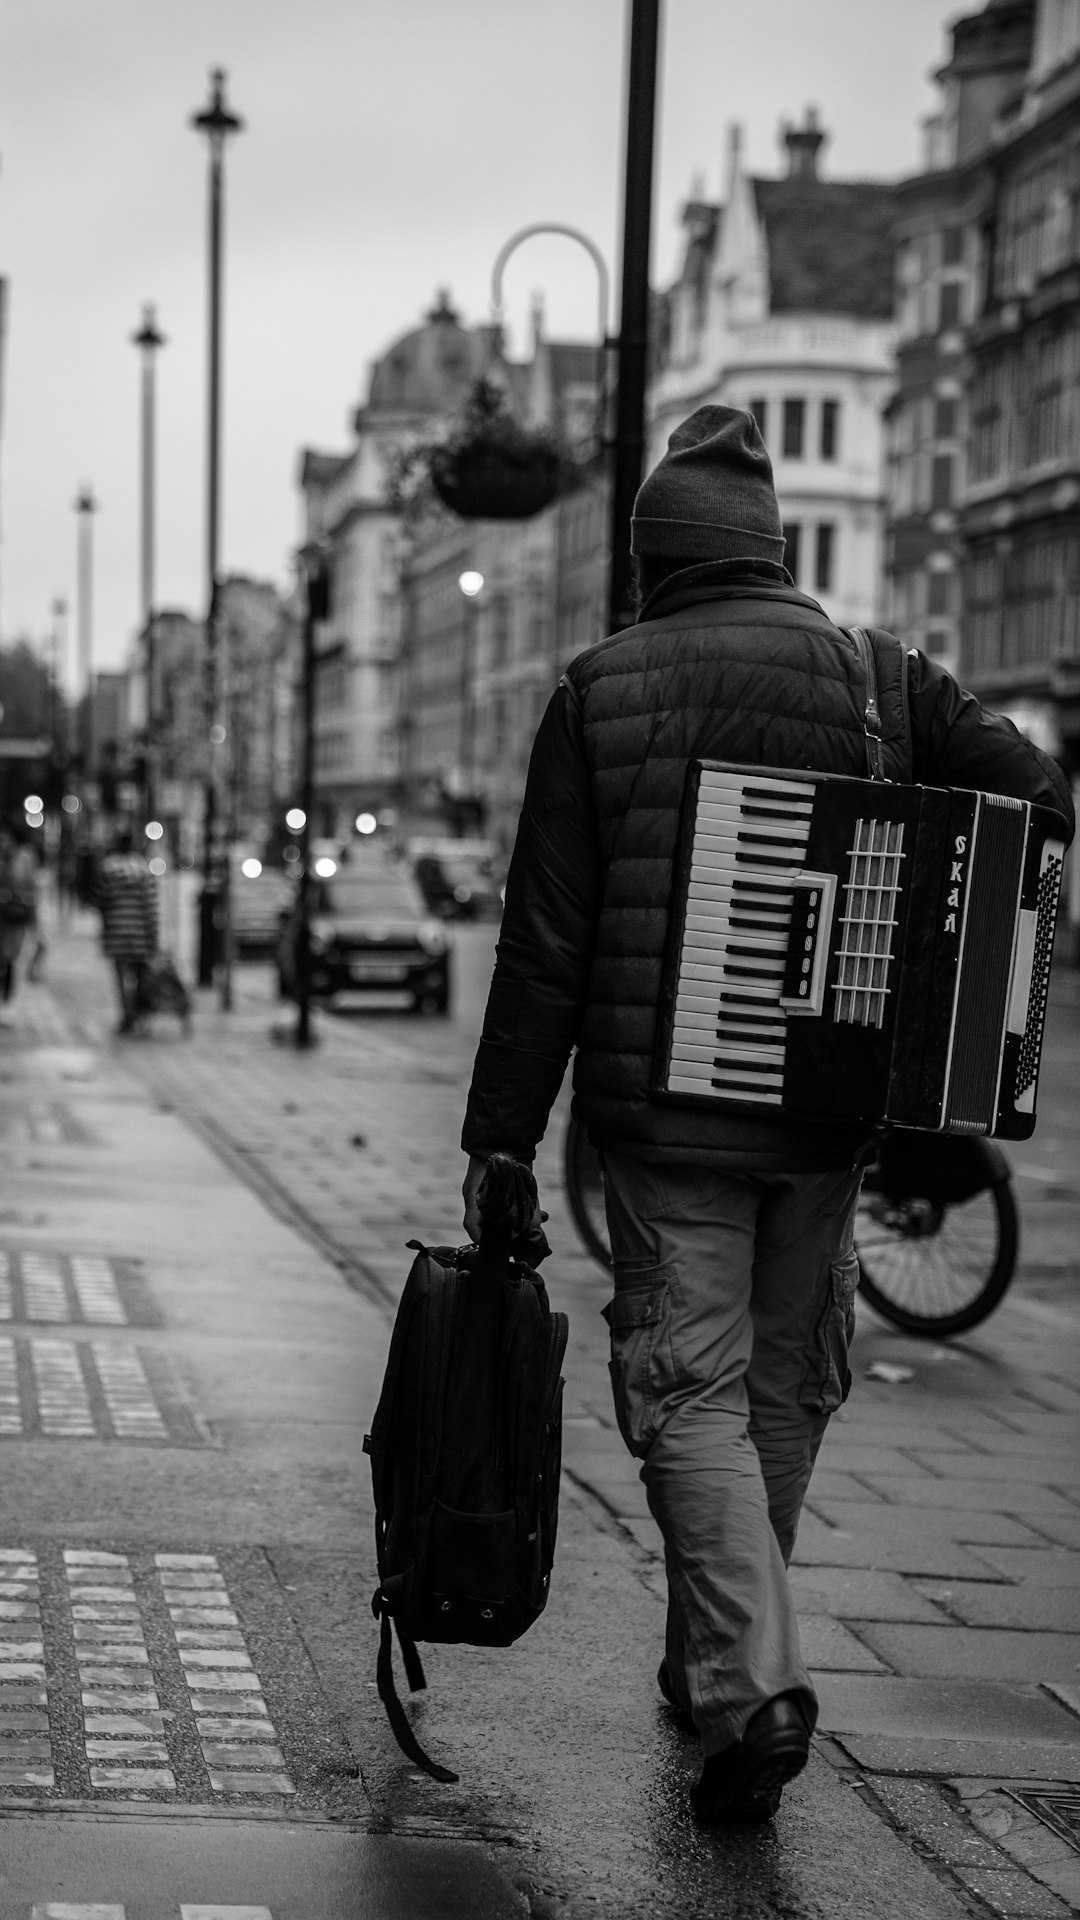 A man walking down the street with an accordion case on his back, in the style of black and white photography, street photography, london city, wide angle shot. –ar 9:16